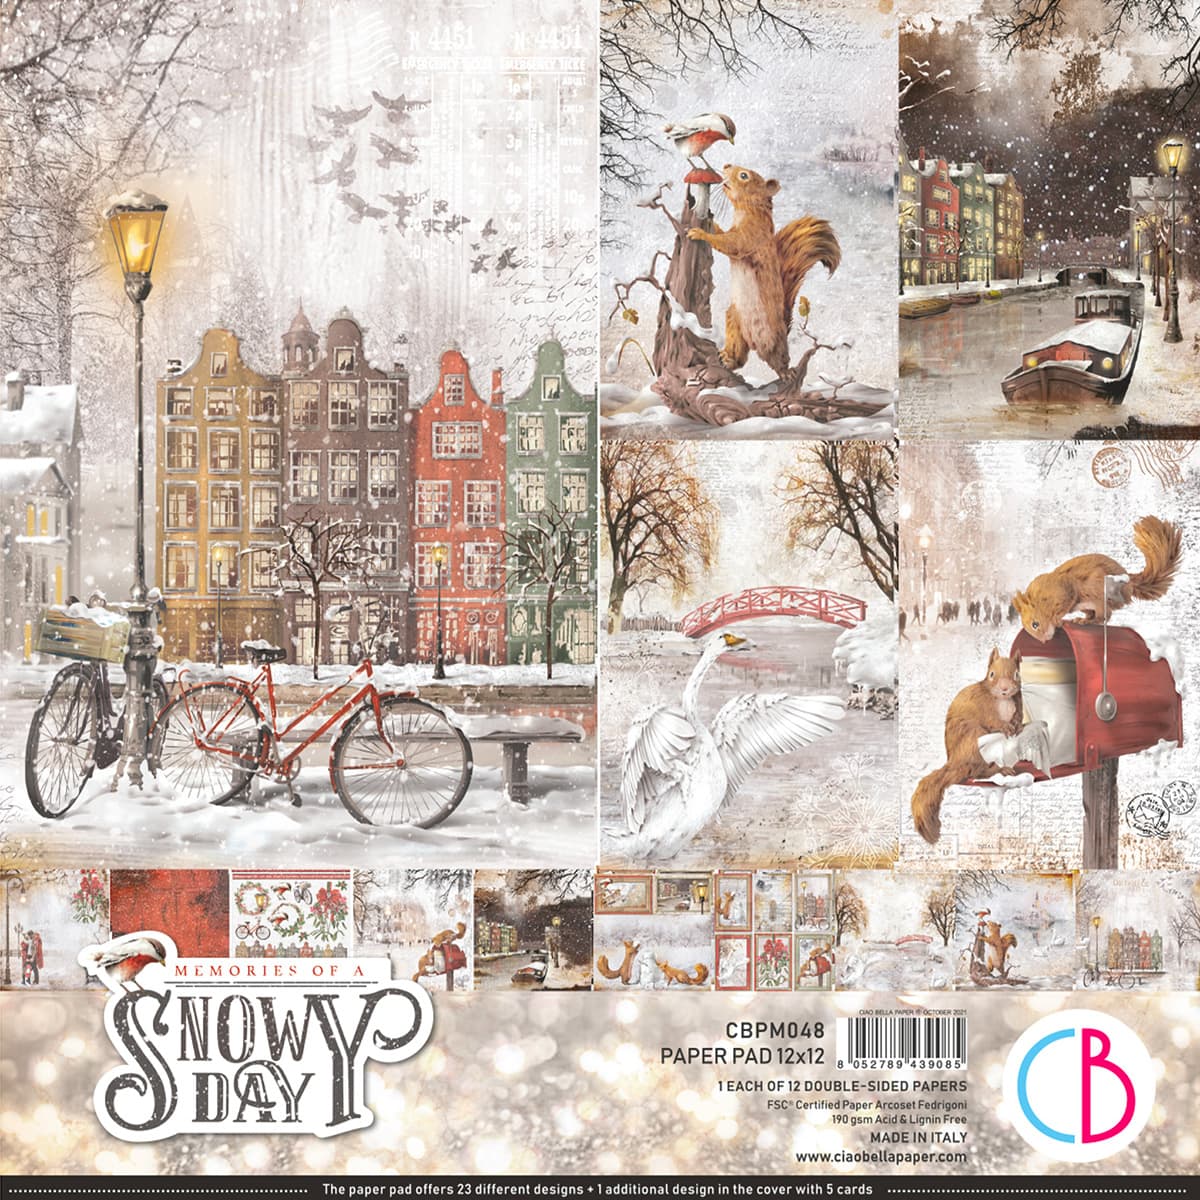 MEMORIES OF A SNOWY DAY PAPER PAD 12"X12" 12/PKG